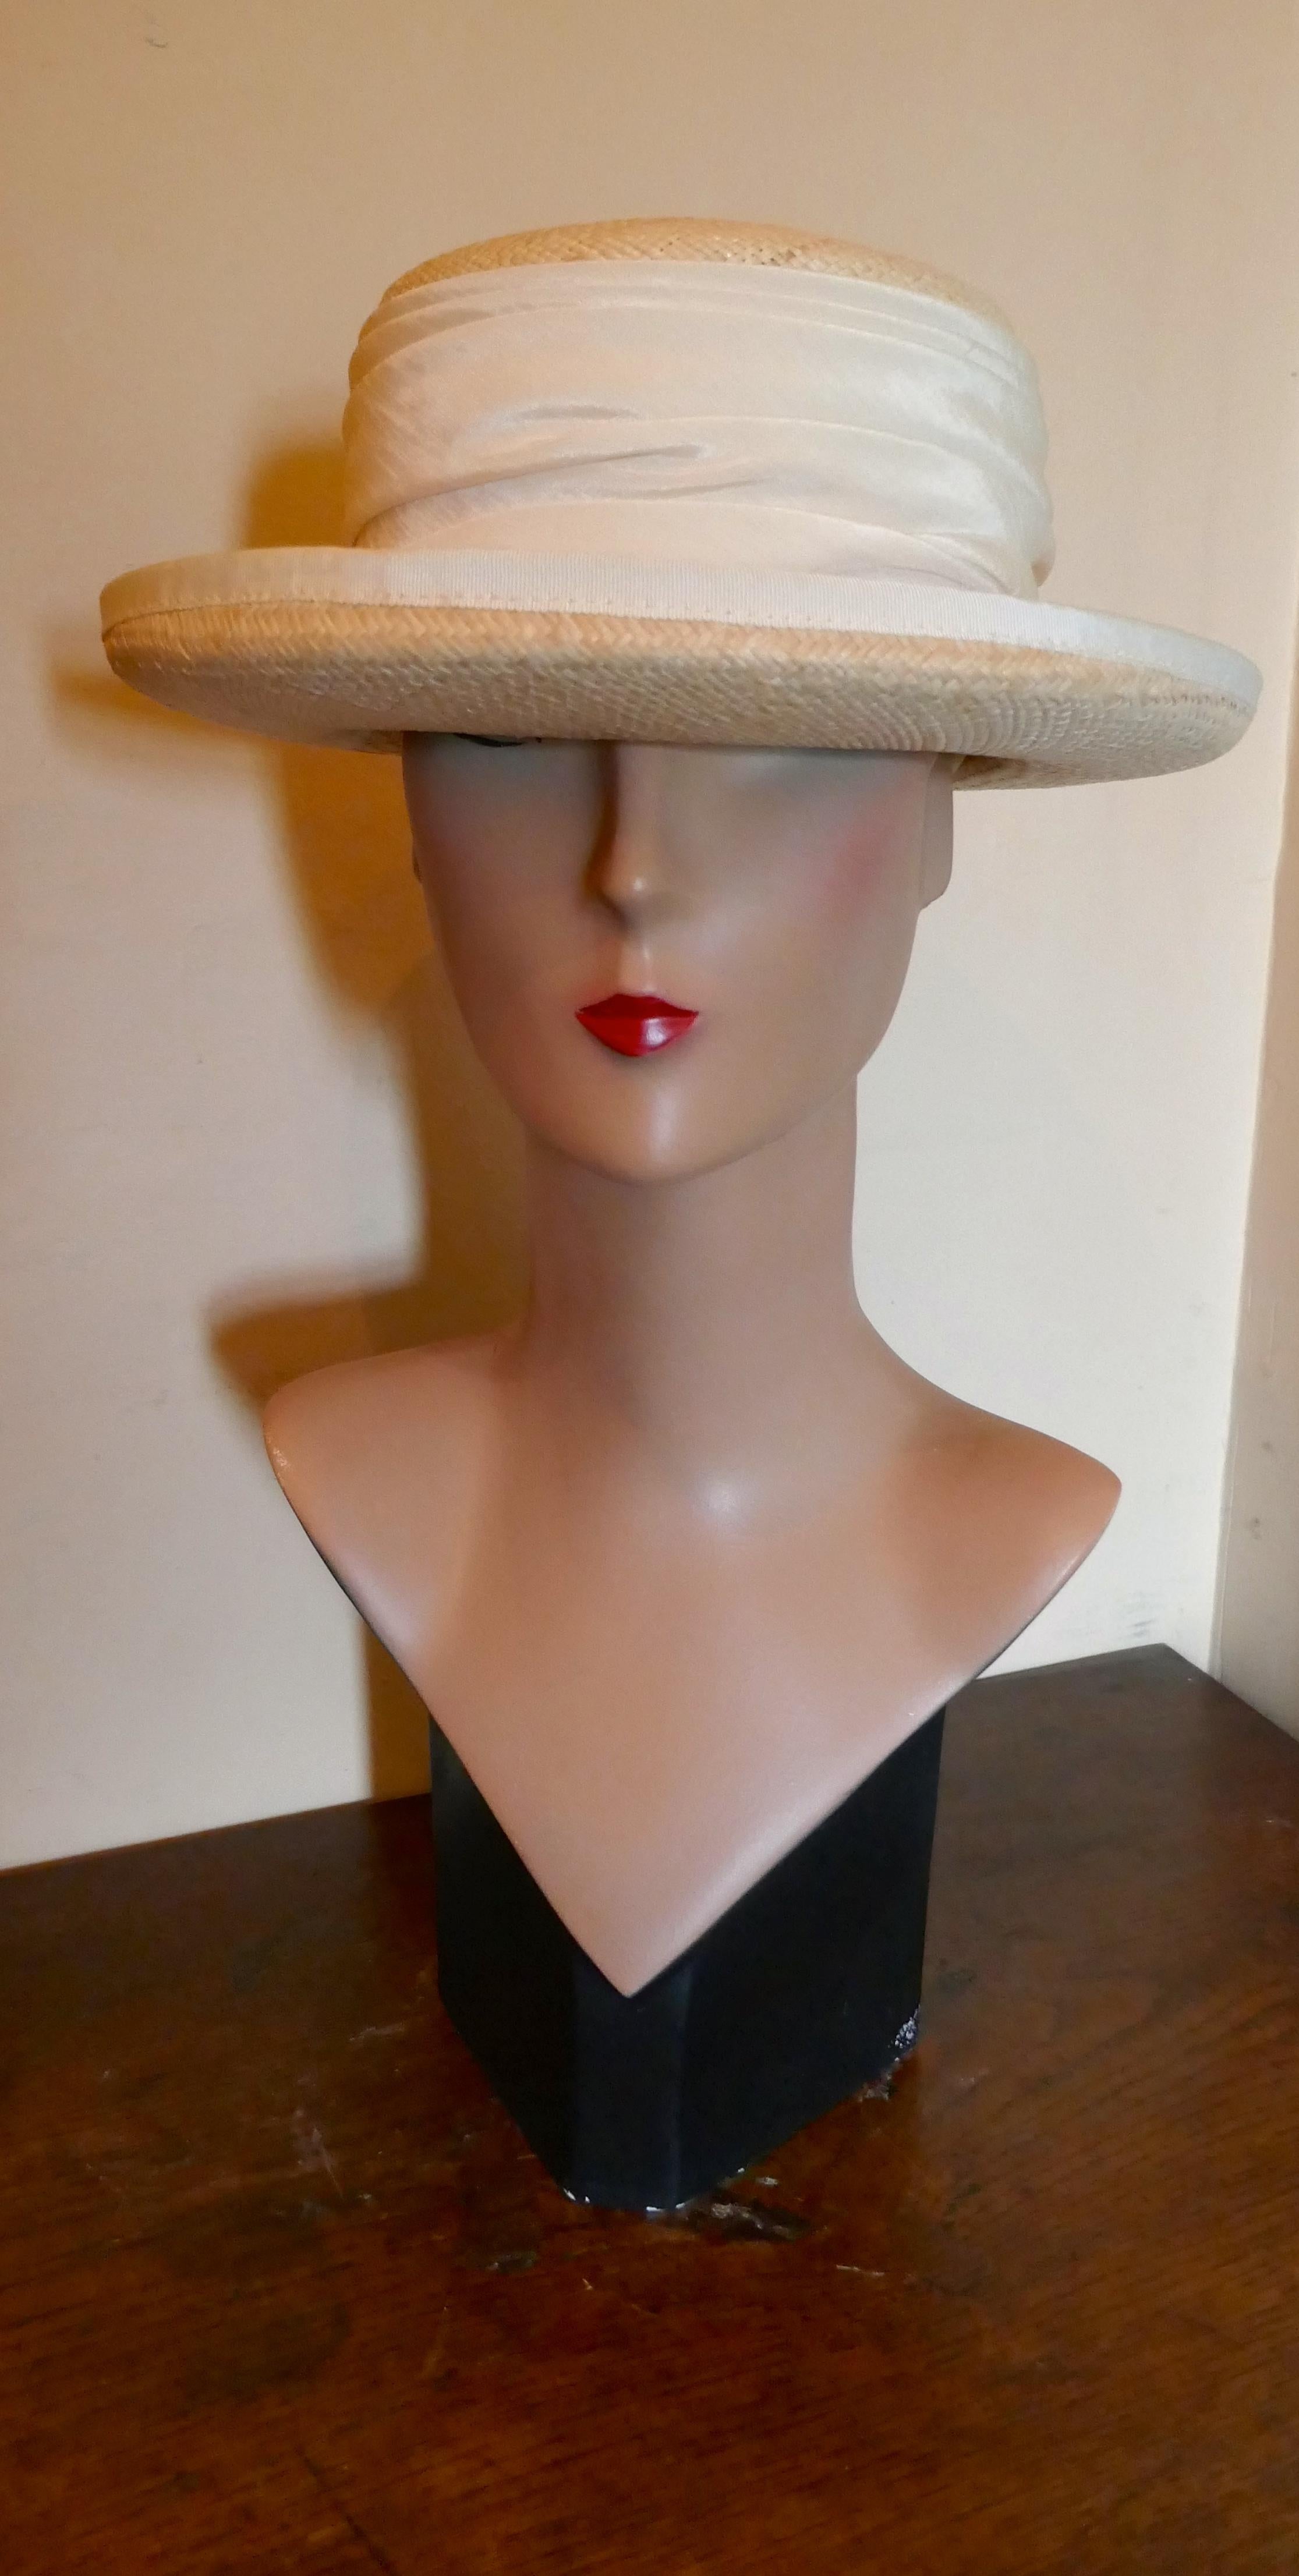 Beautiful 1970s Deep Brim Boater Panama Hat by BASKA Design London 

Superb Panama hat with fabric Ivory trim to the curled brim and and deep gathered Ivory hat band to the crown

The hat is very fine quality and in good condition, it is made by